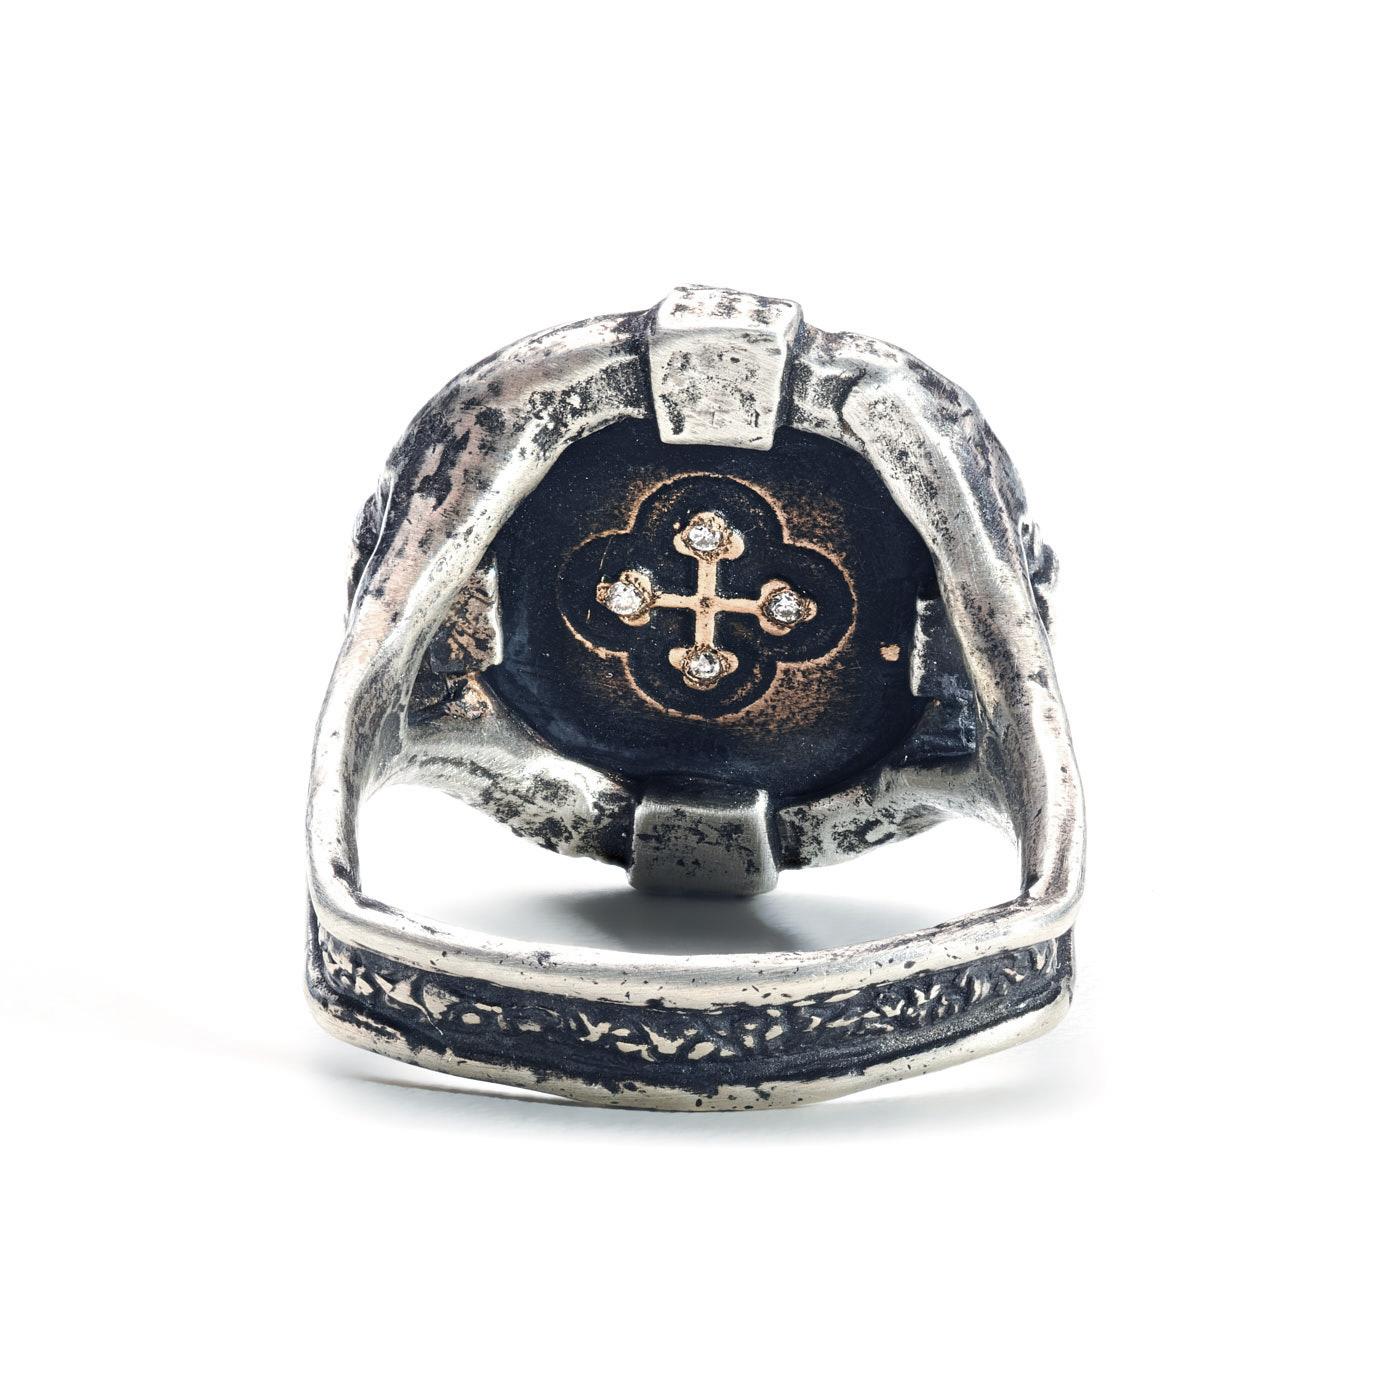 - Diamonds
- Audaces Fortuna Invat
- Fortune Favors the Bold
- cross coin ring
- ring that measures 1.5